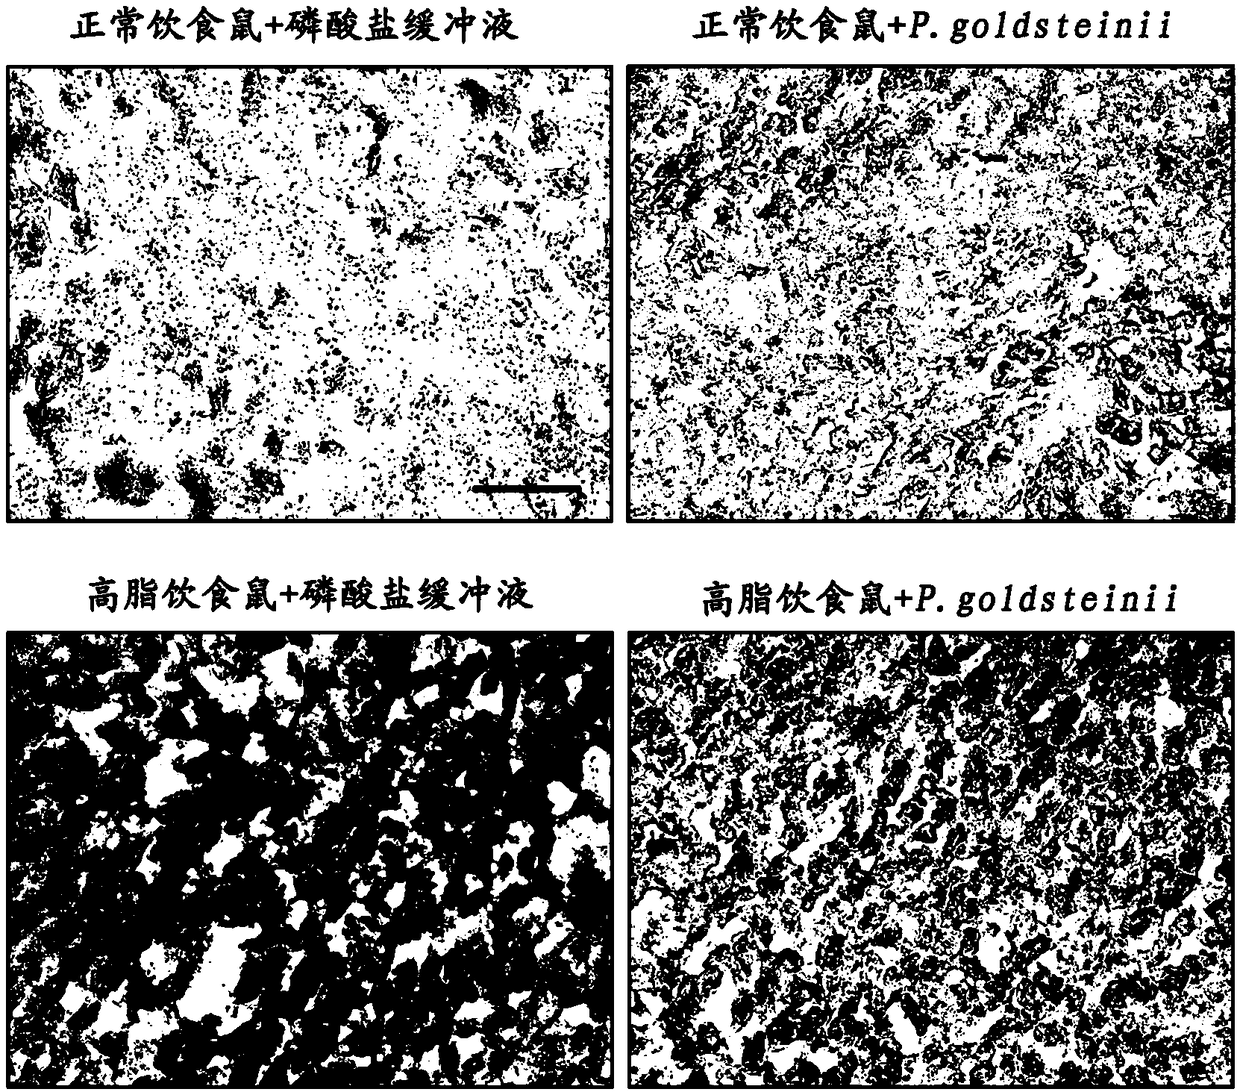 Use of parabacteroides goldsteinii to treat fatty liver disease